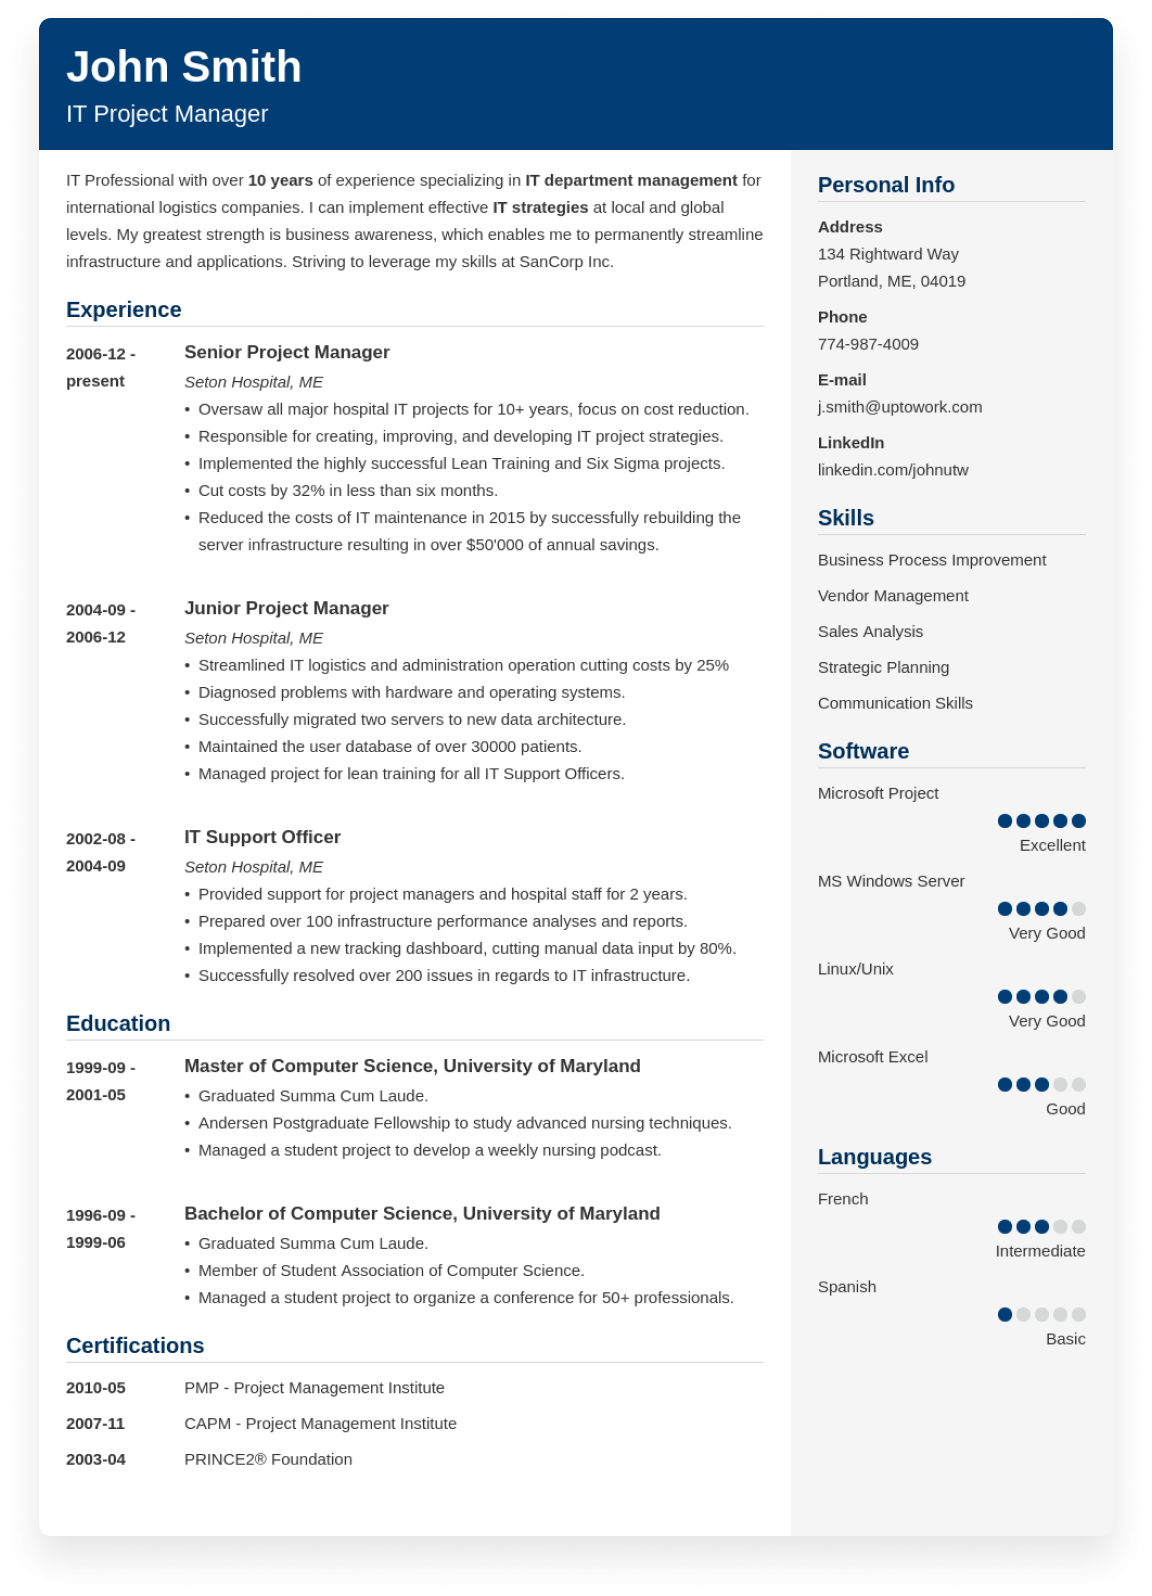 ResumeLab. The perfect resume and cover letter